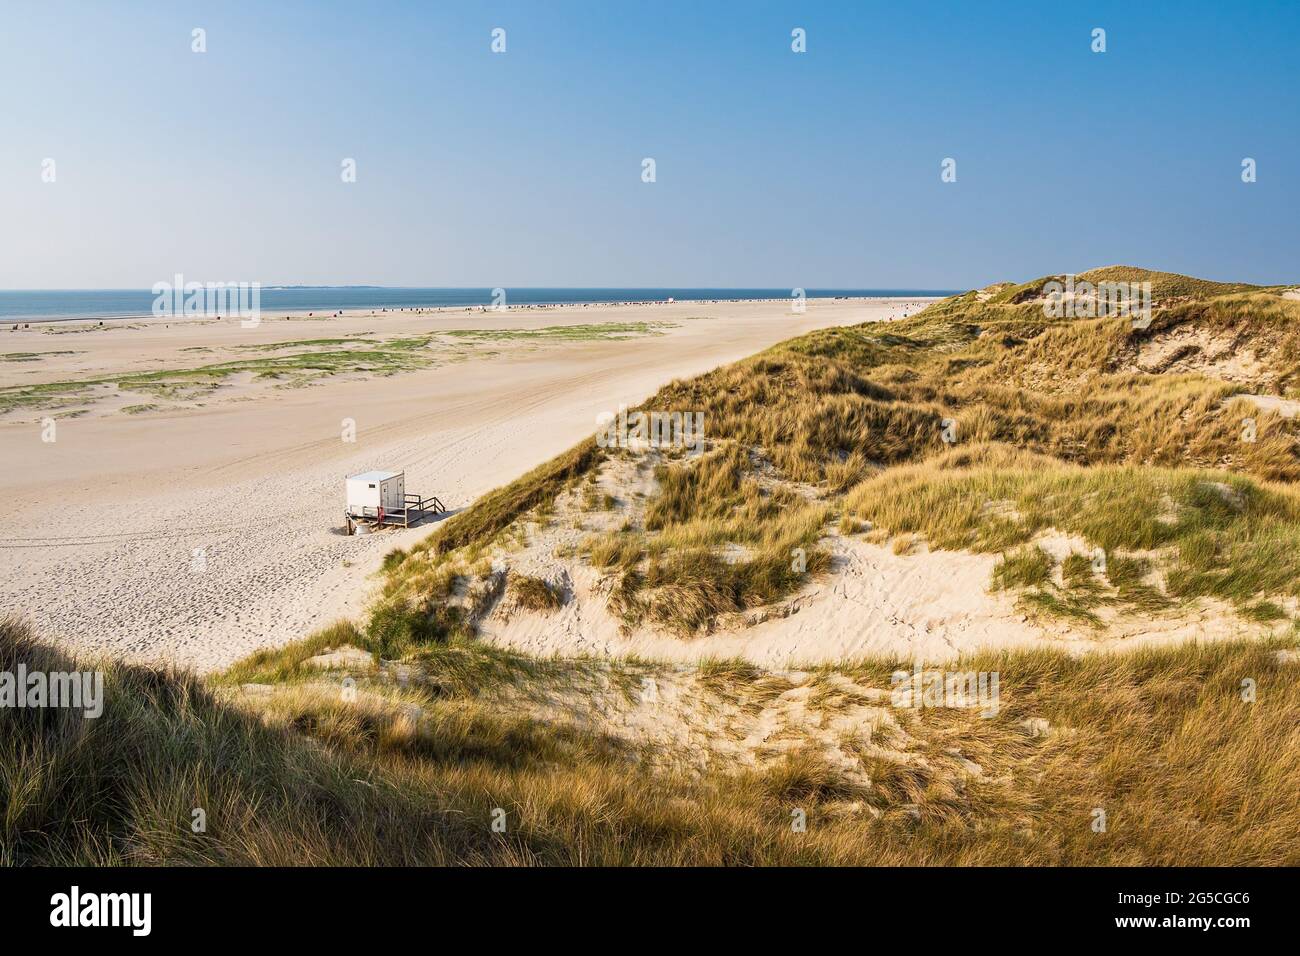 Beach and dunes in Norddorf on the North Sea island Amrum, Germany. Stock Photo